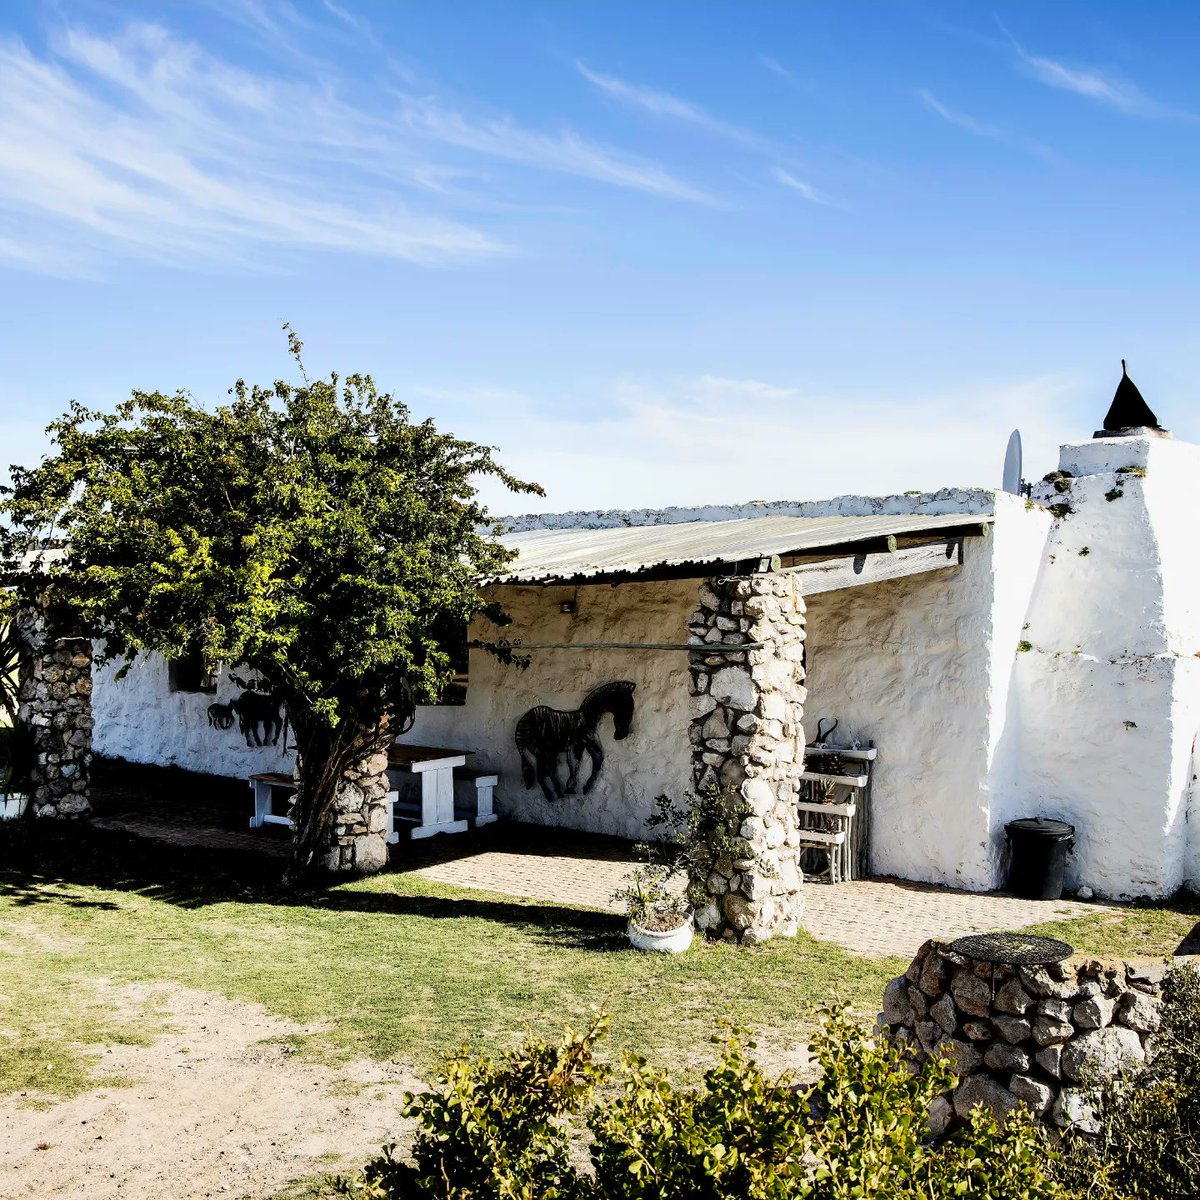 Celebrate Heritage Month with #WestCoastWay 🇿🇦 Make your way to Thali Thali Game Lodge and experience South African biodiversity, wildlife, and birdlife at a destination suited for the WHOLE family 🥰 Find out where, what and how here 👇🏽 westcoastway.co.za/five-top-thing…